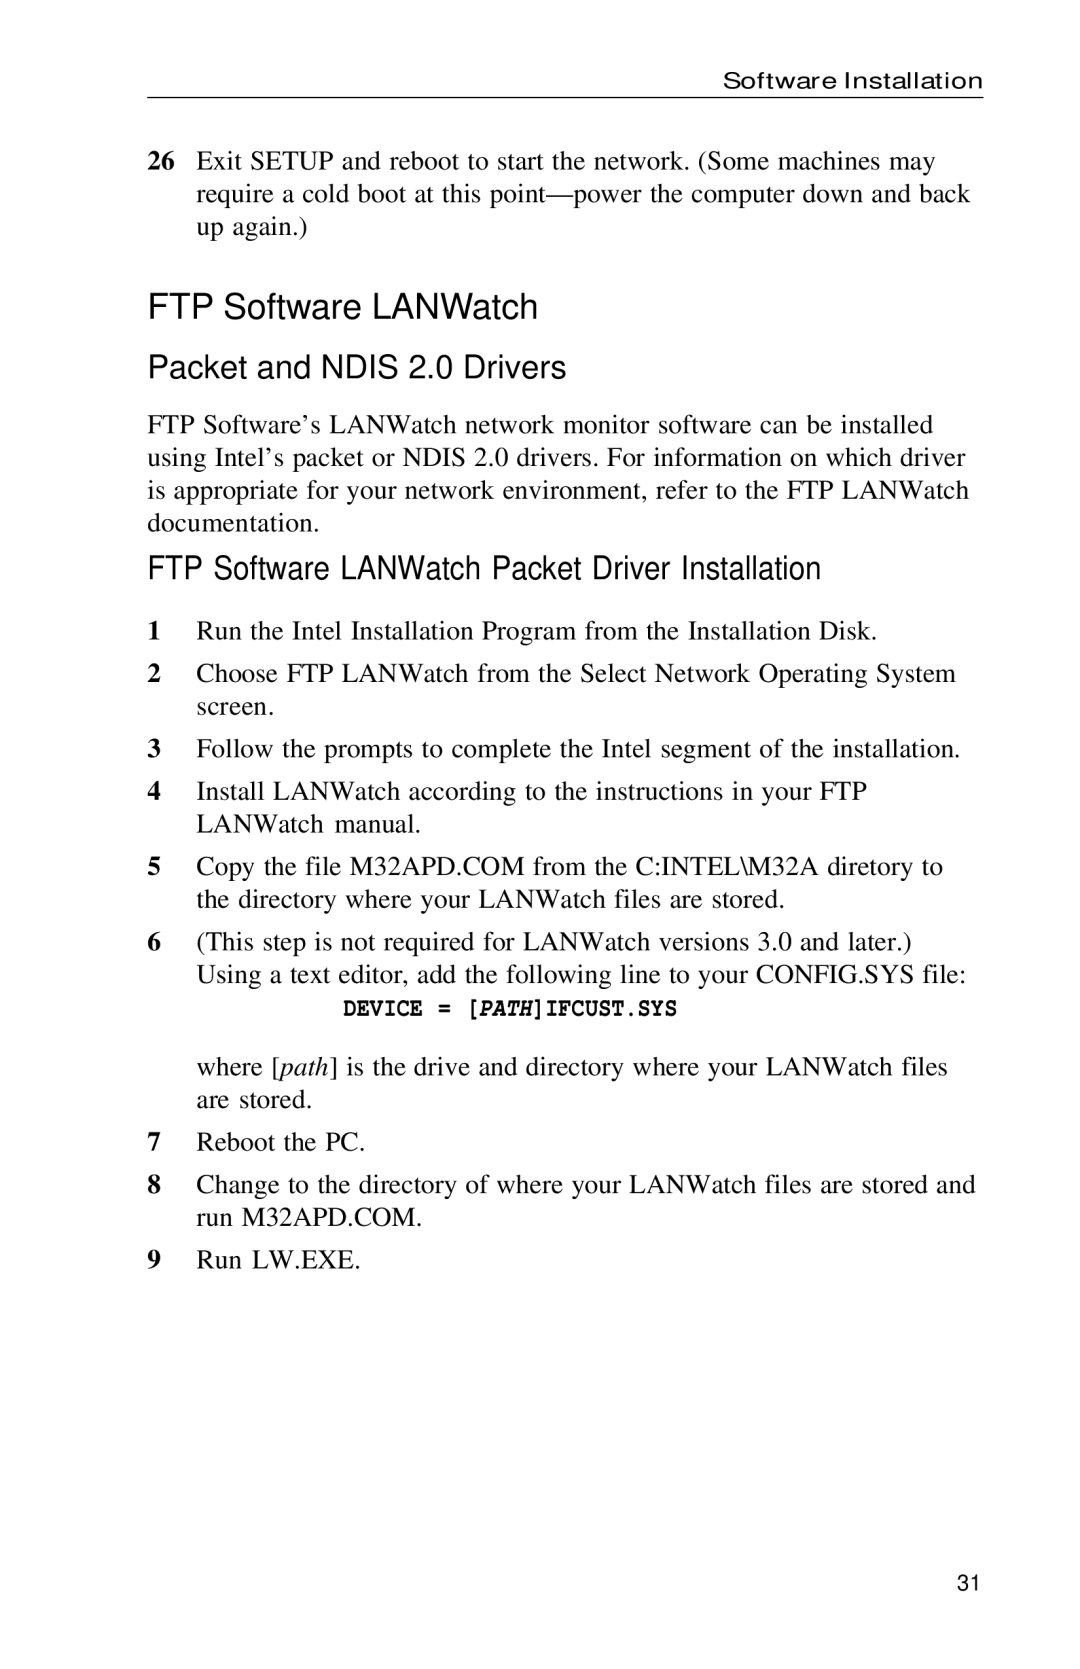 Intel PRO Packet and Ndis 2.0 Drivers, FTP Software LANWatch Packet Driver Installation, Device = PATHIFCUST.SYS 